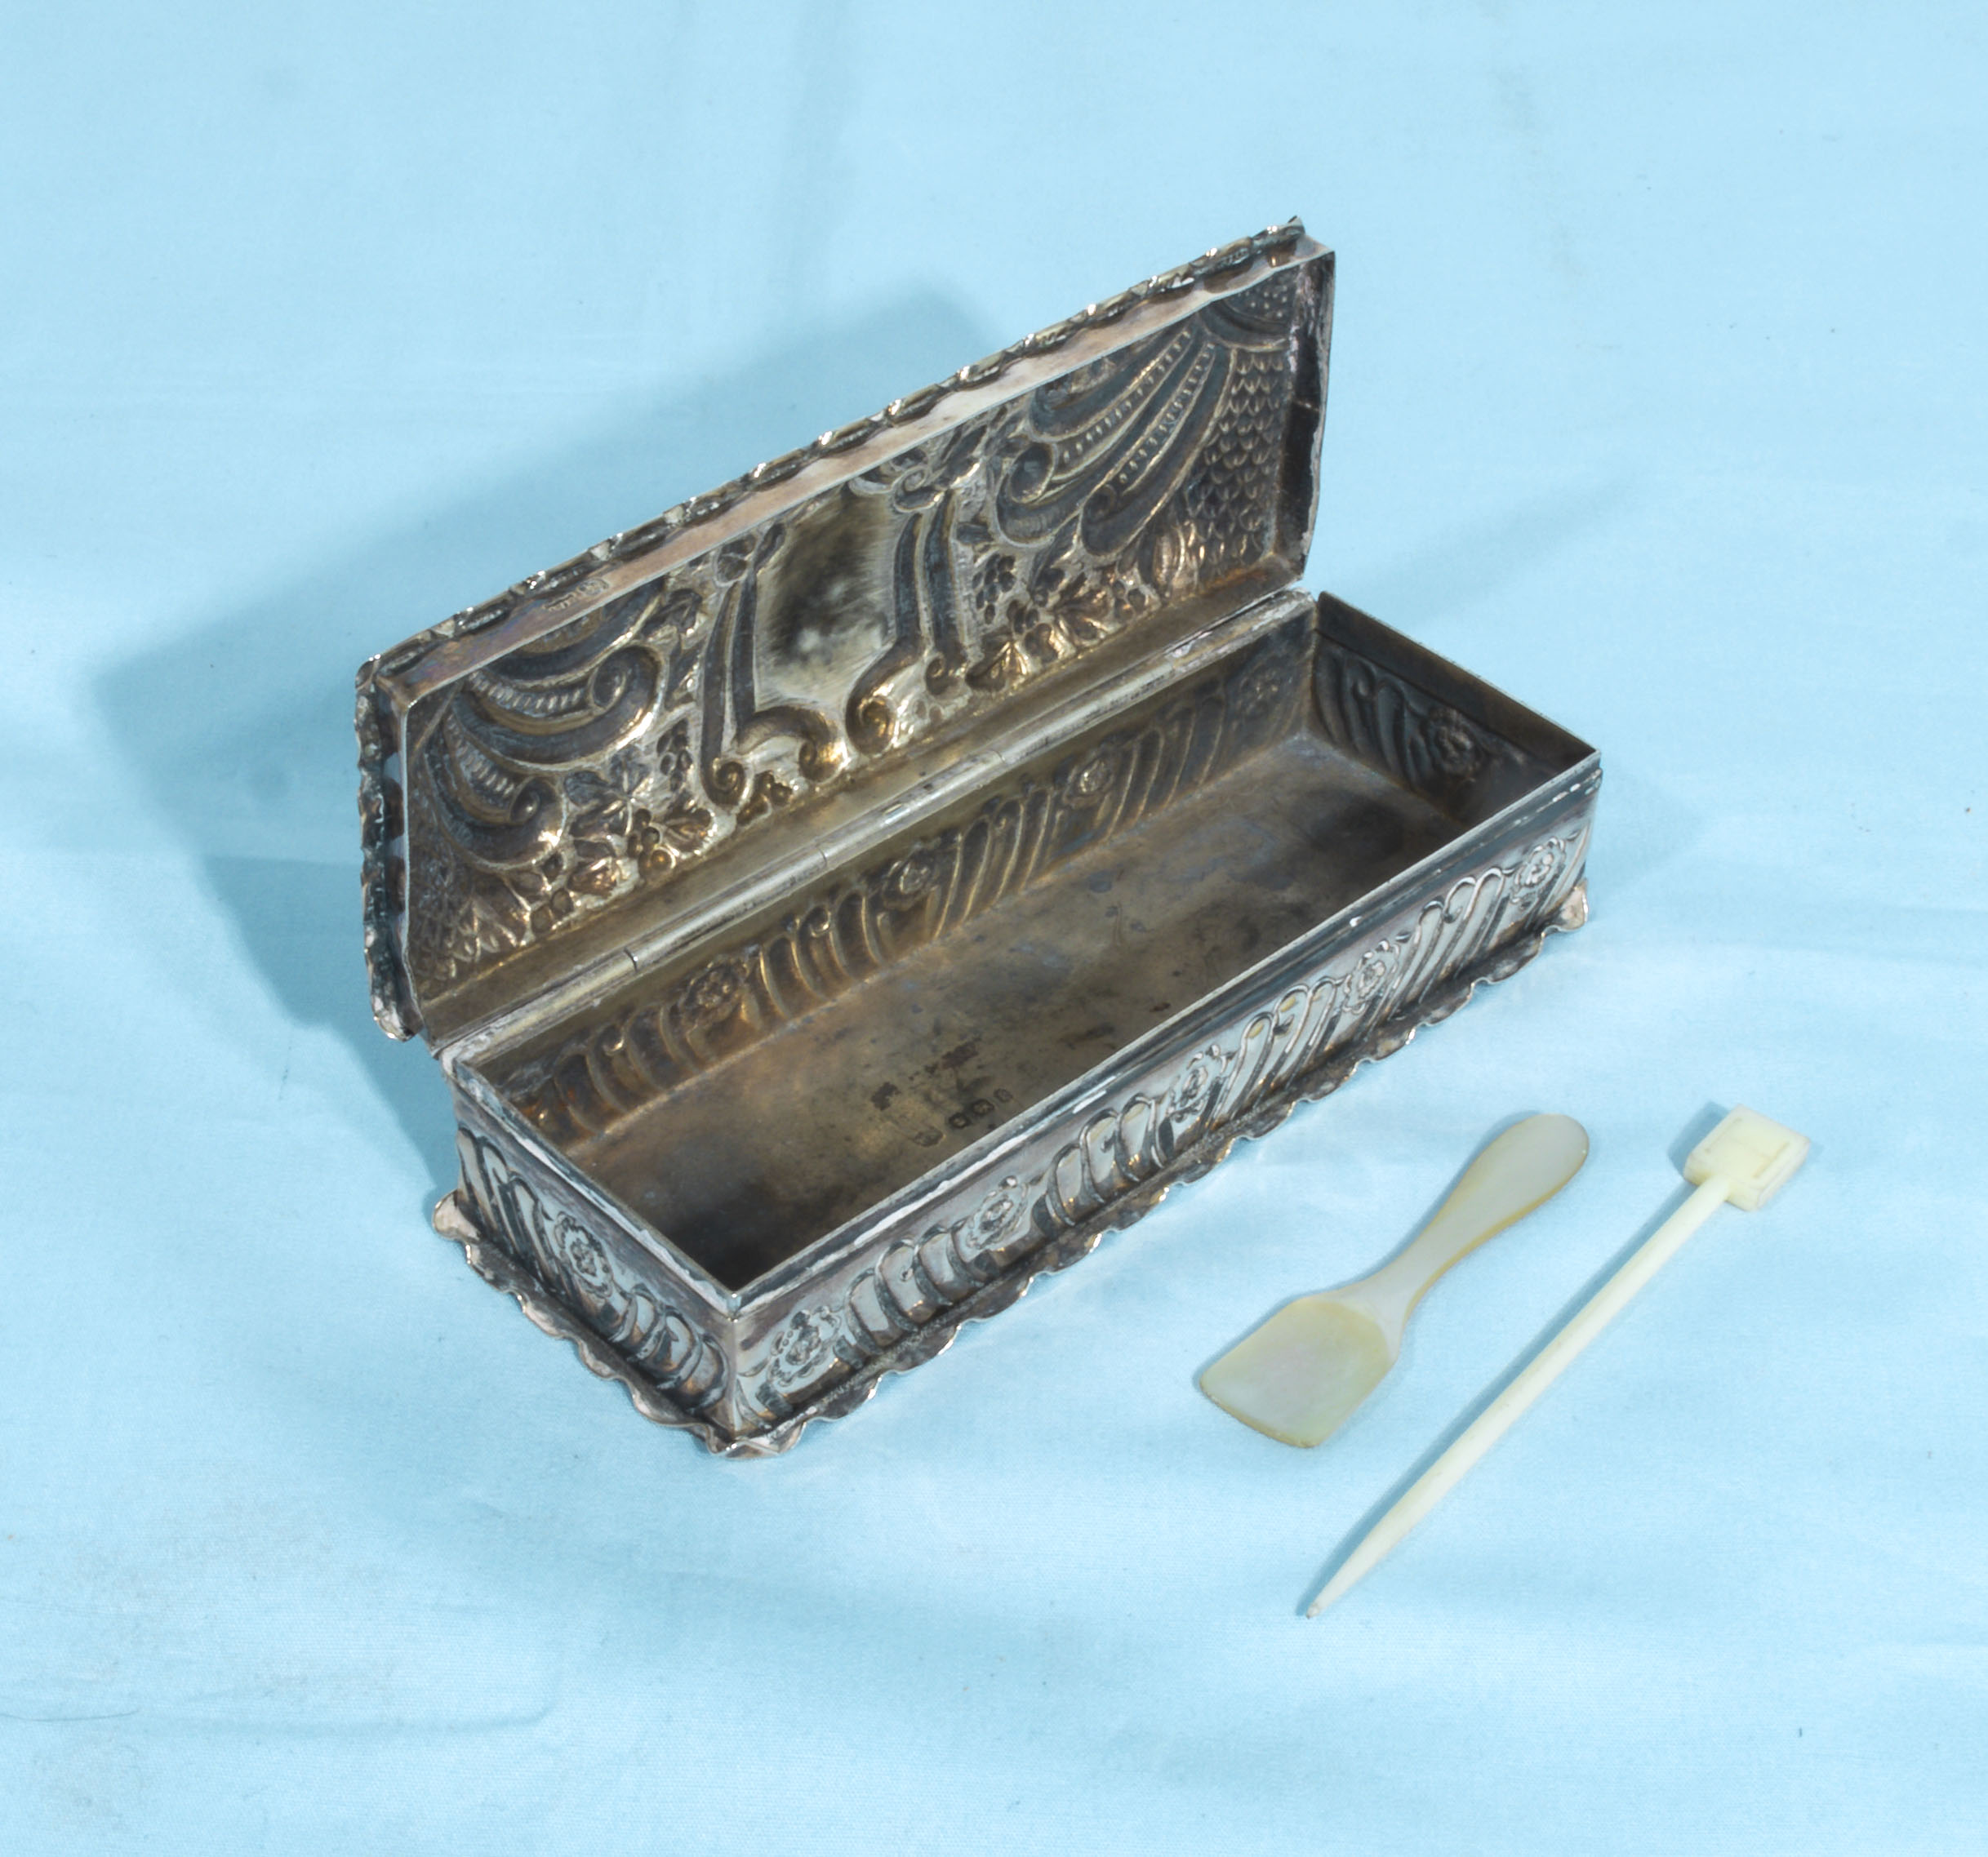 A small silver box, stamps for Birmingham 1911, maker W.N. 10cm long, 76gm